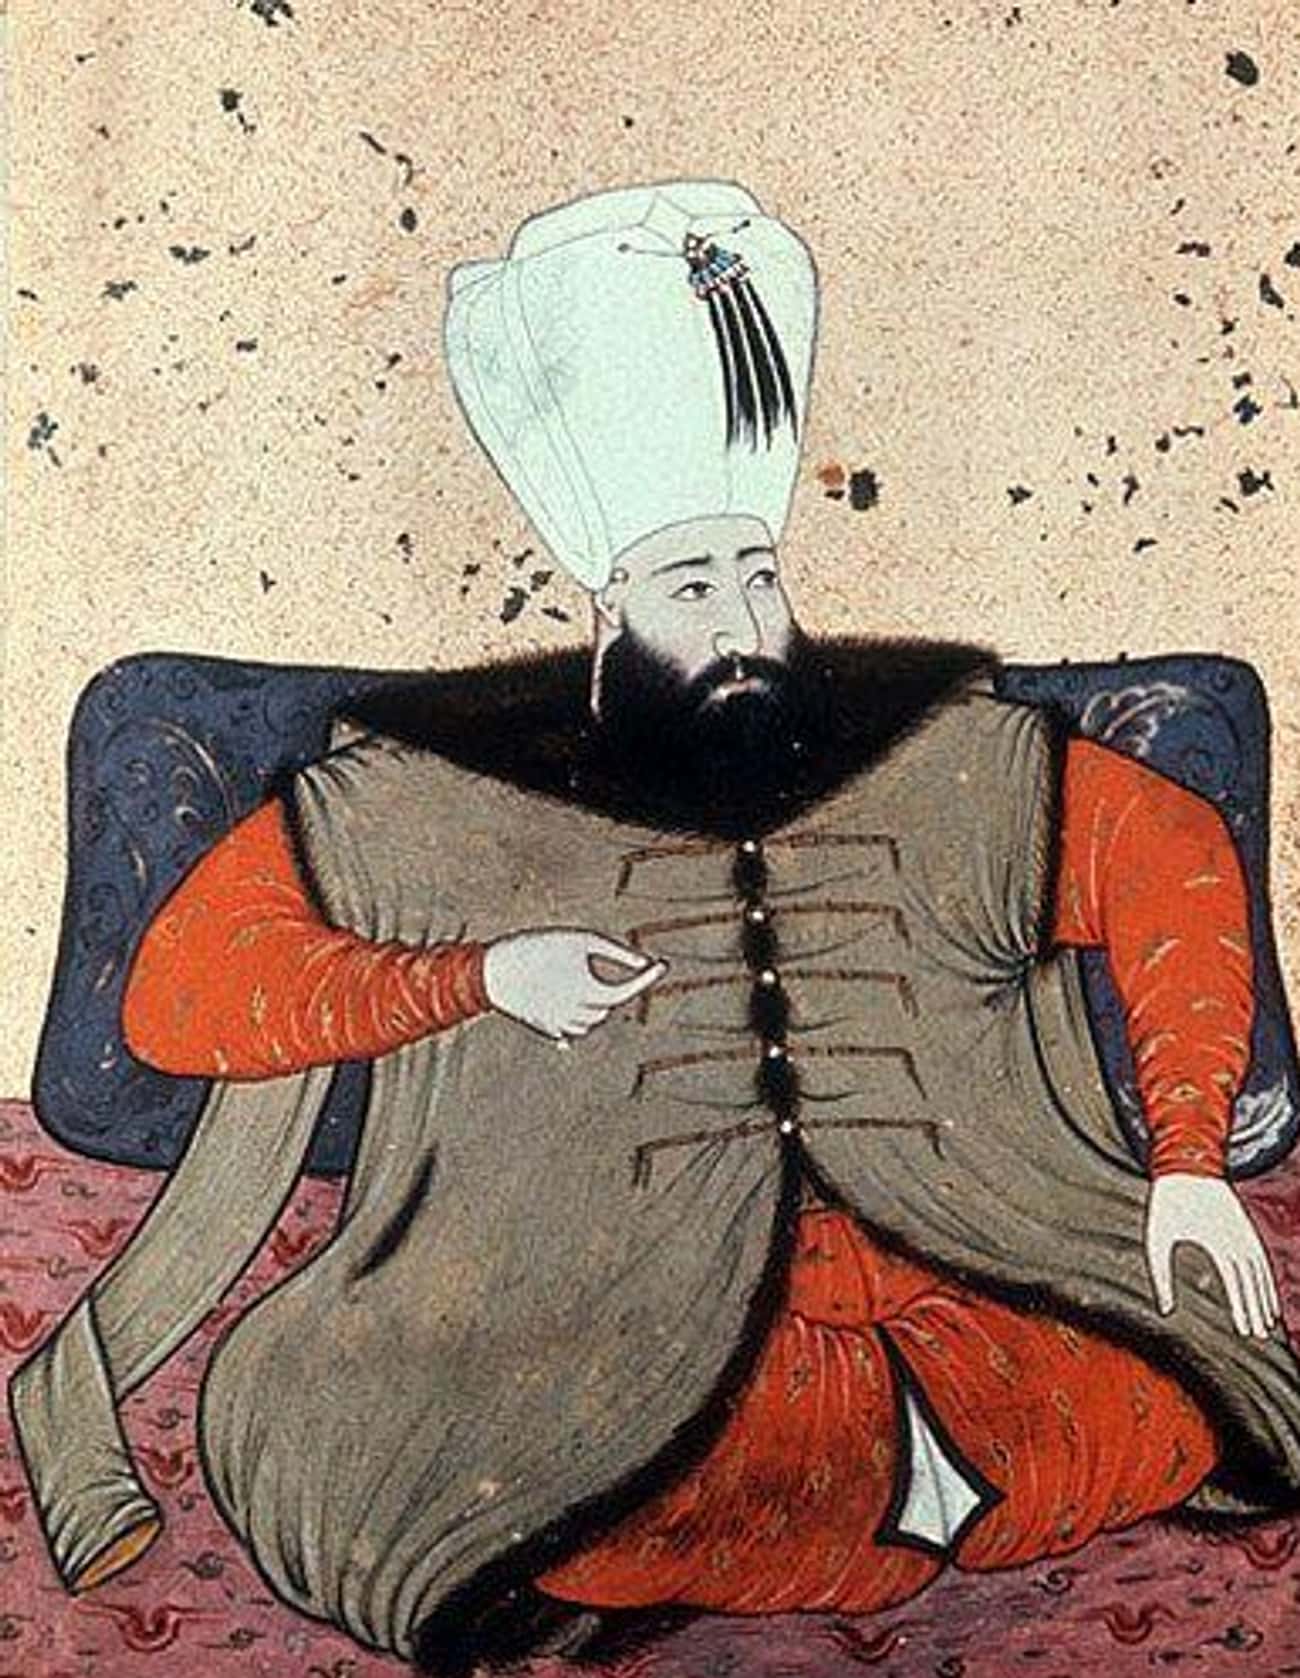 When He Was Told He Was The New Sultan, He Thought It Was Entrapment